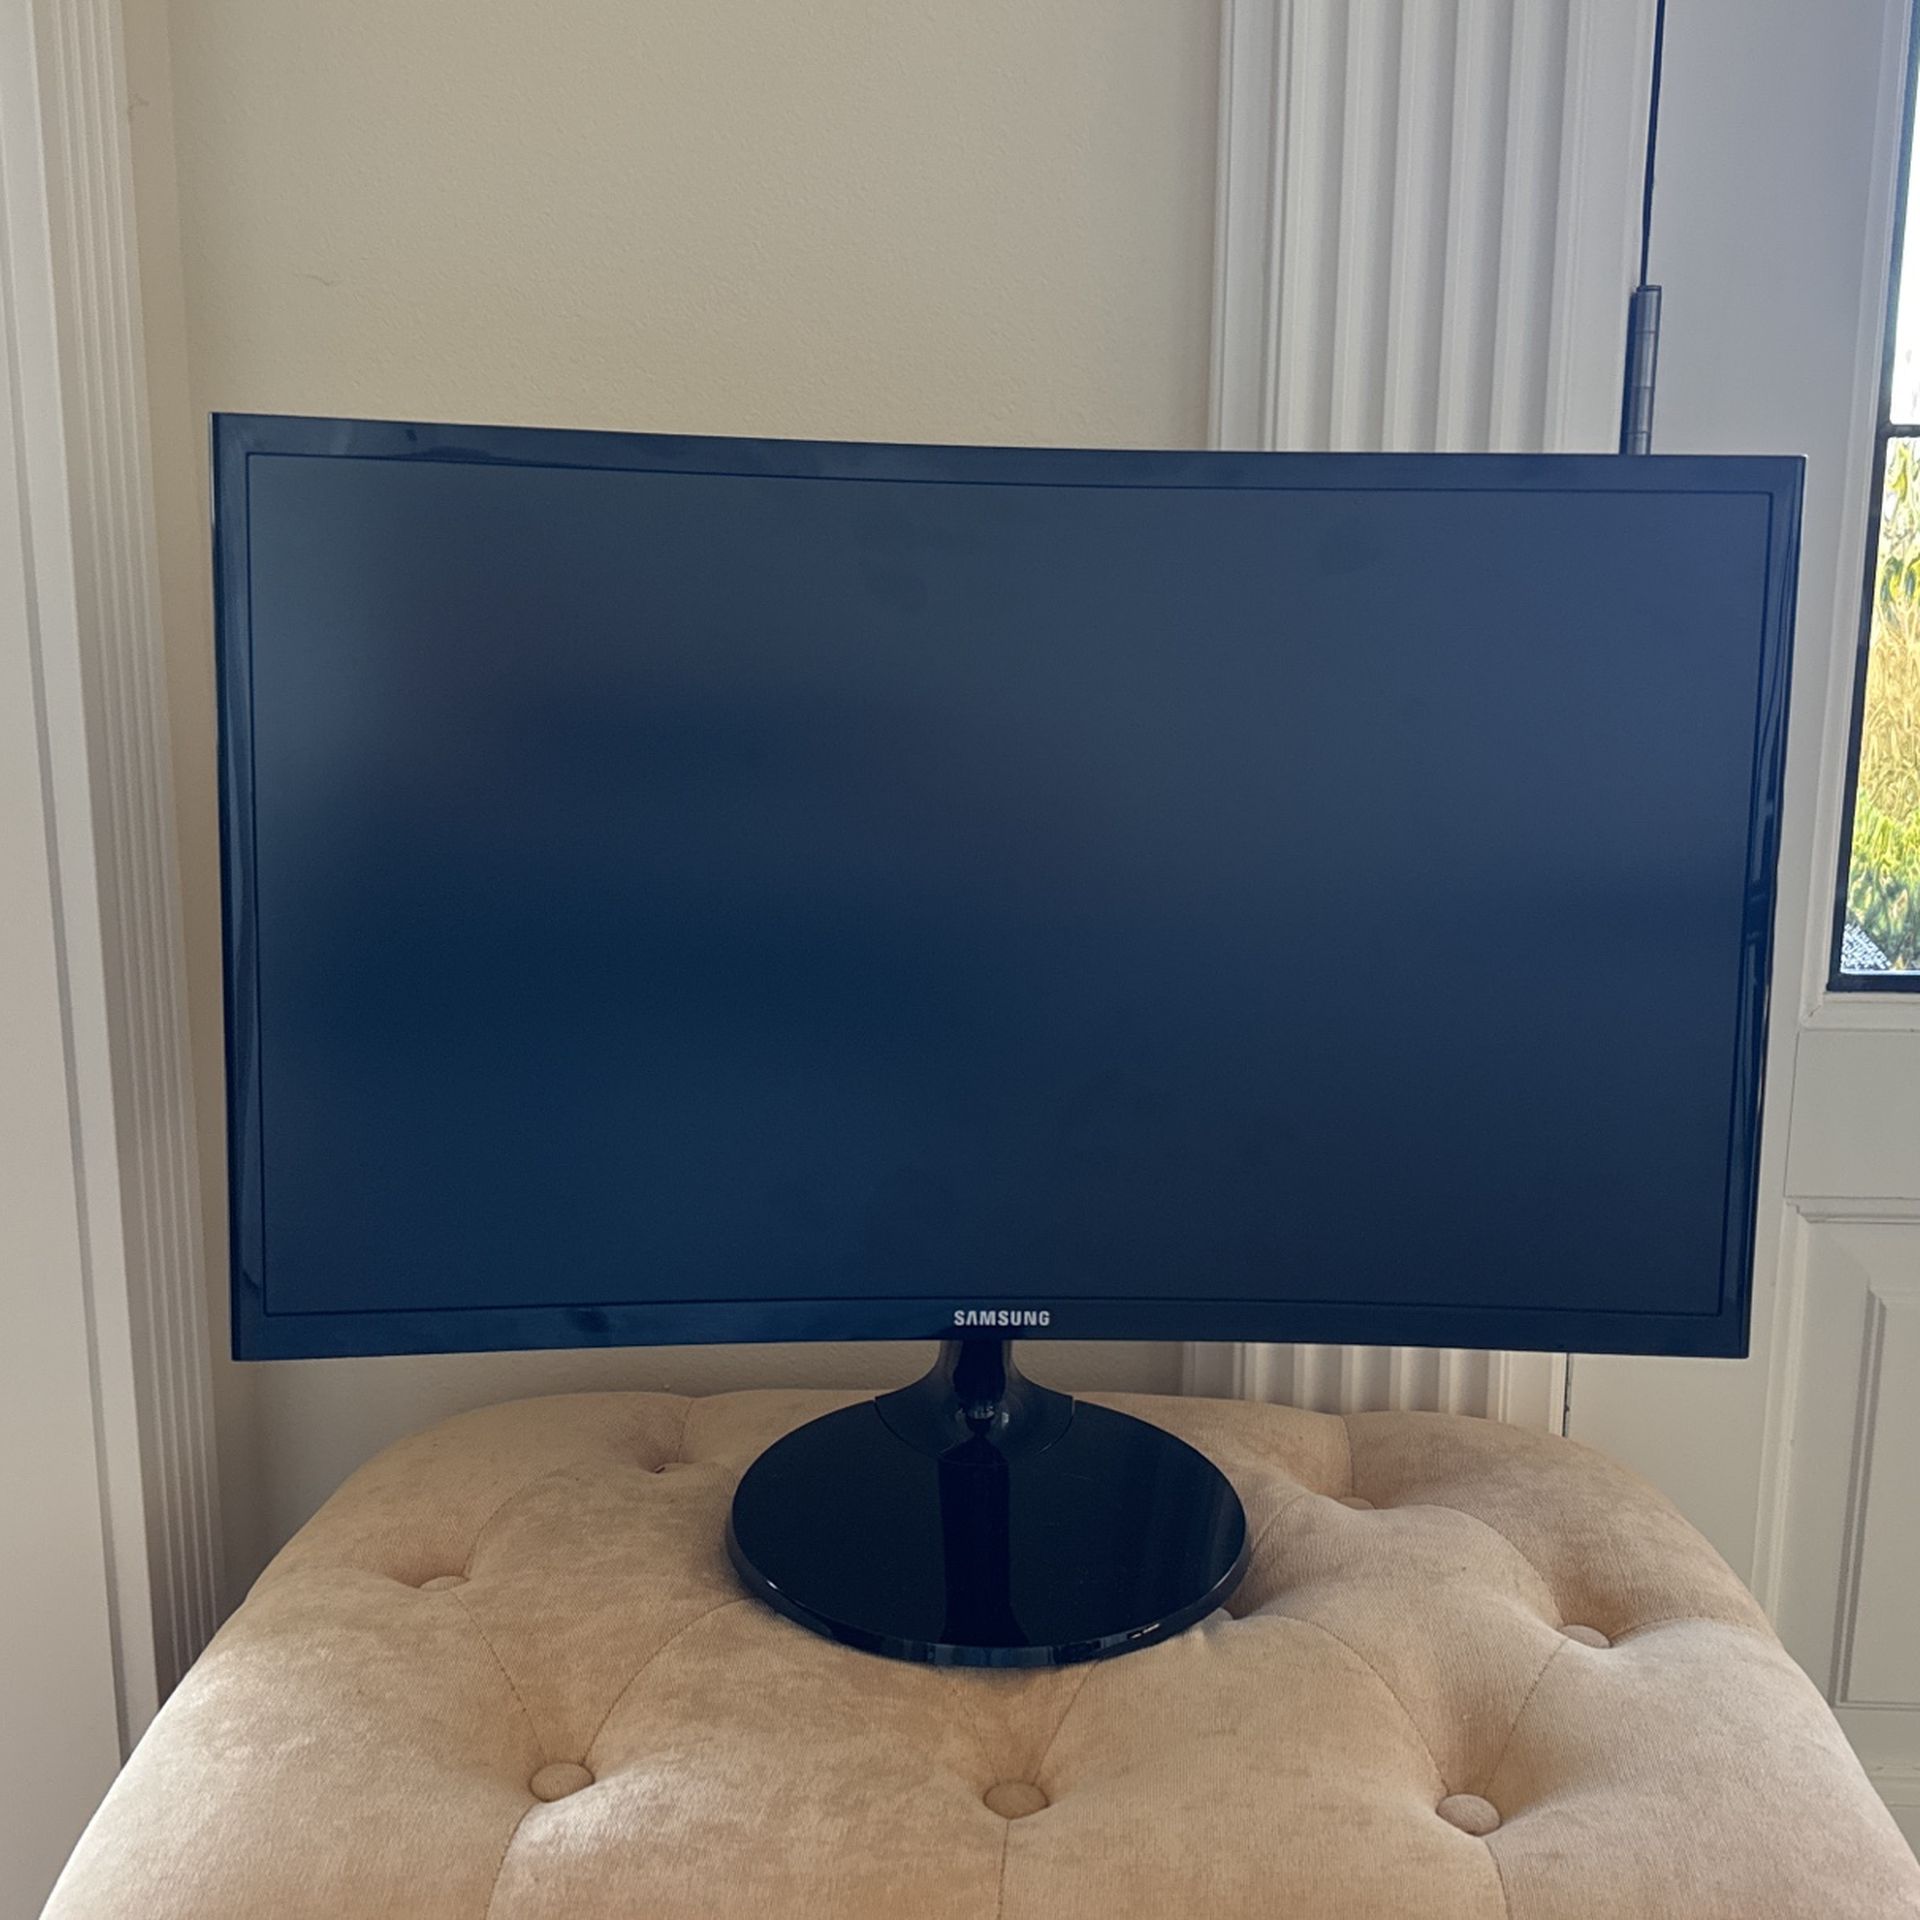 Samsung HD Curved Monitor 24”- Excellent Condition 